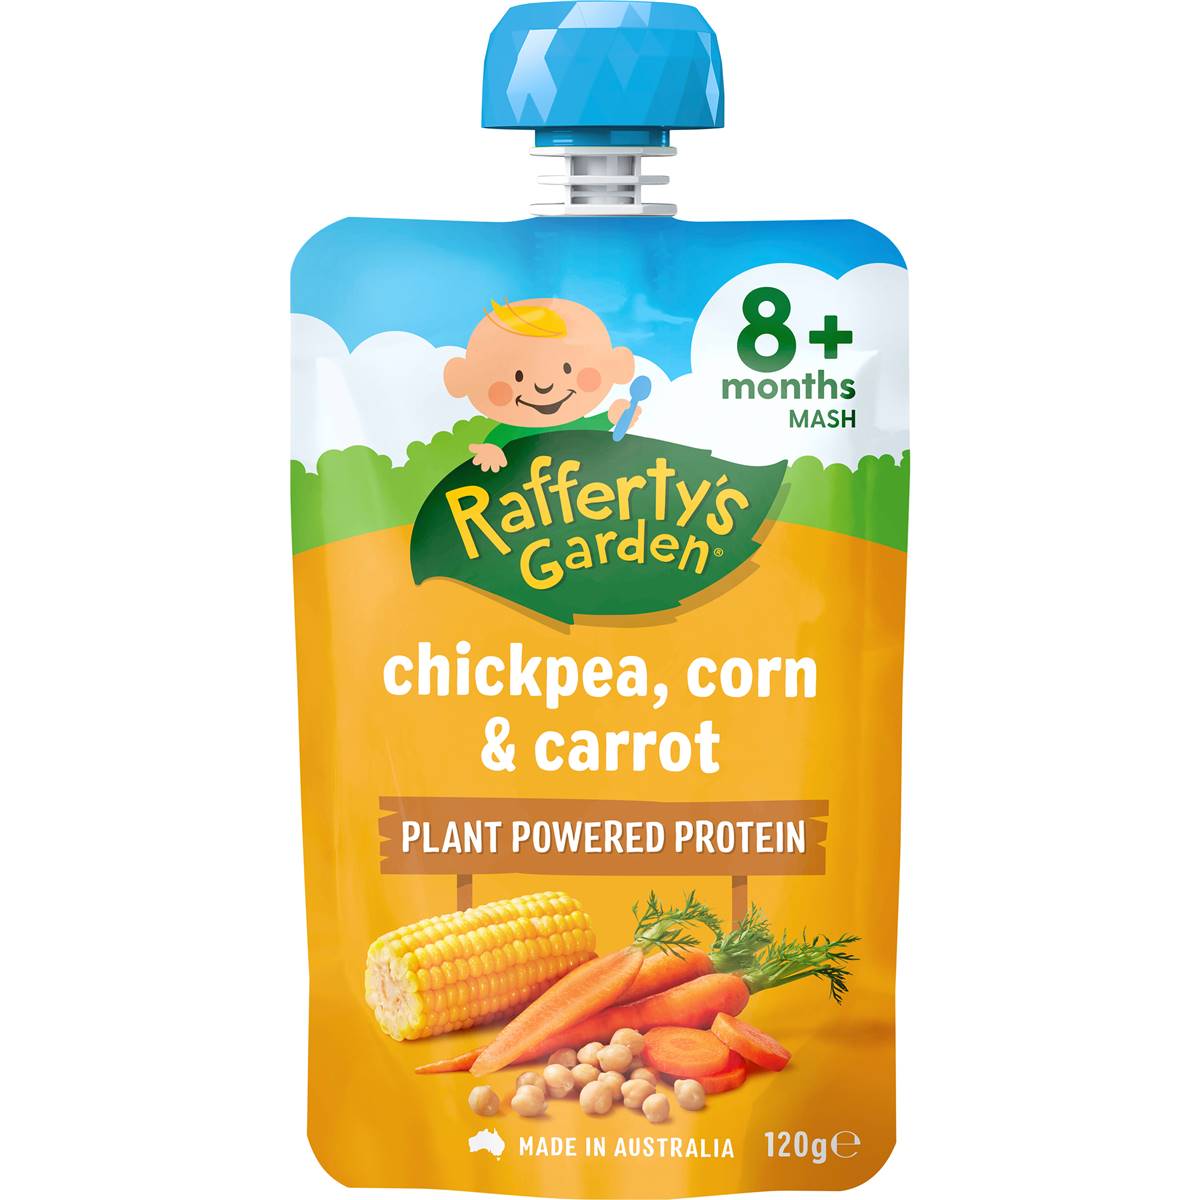 Calories in Rafferty's Garden Baby Food Pouch Chickpea, Corn & Carrot Protein 8+ Months